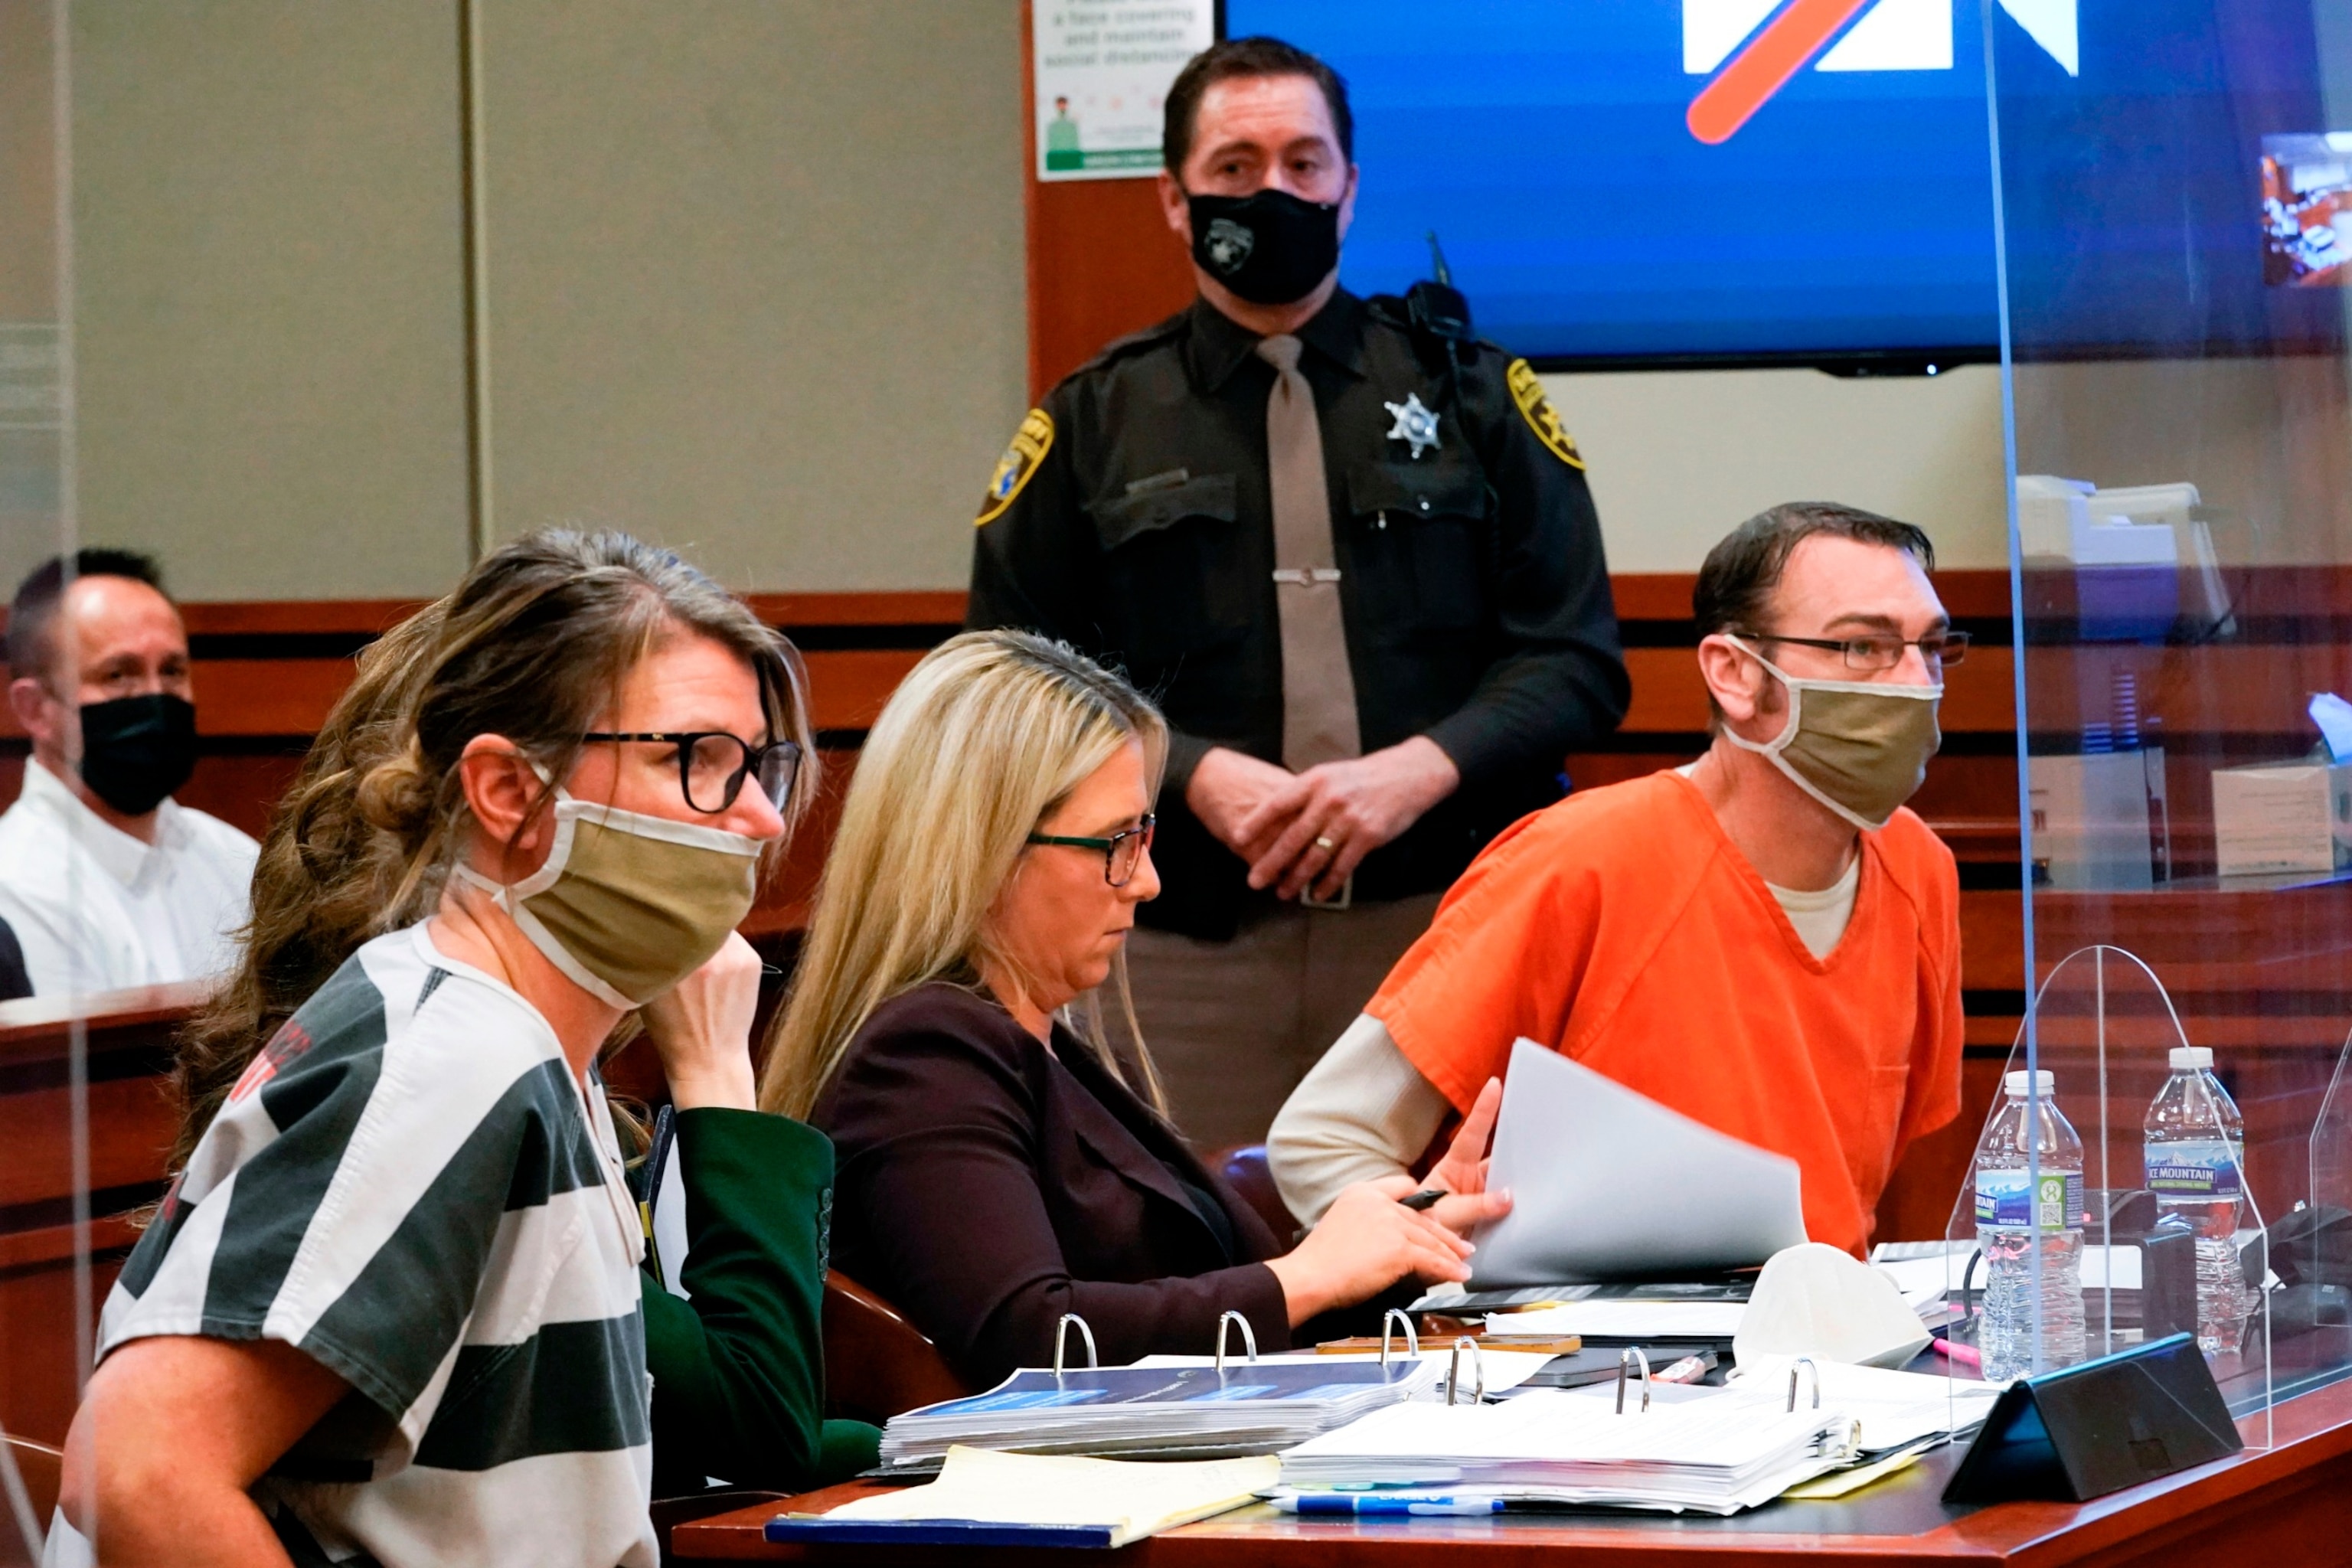 PHOTO: In this Feb. 8, 2022, file photo, Jennifer Crumbley, left, and James Crumbley, right, the parents of Ethan Crumbley, appear in court for a preliminary examination on involuntary manslaughter charges in Rochester Hills, Mich.